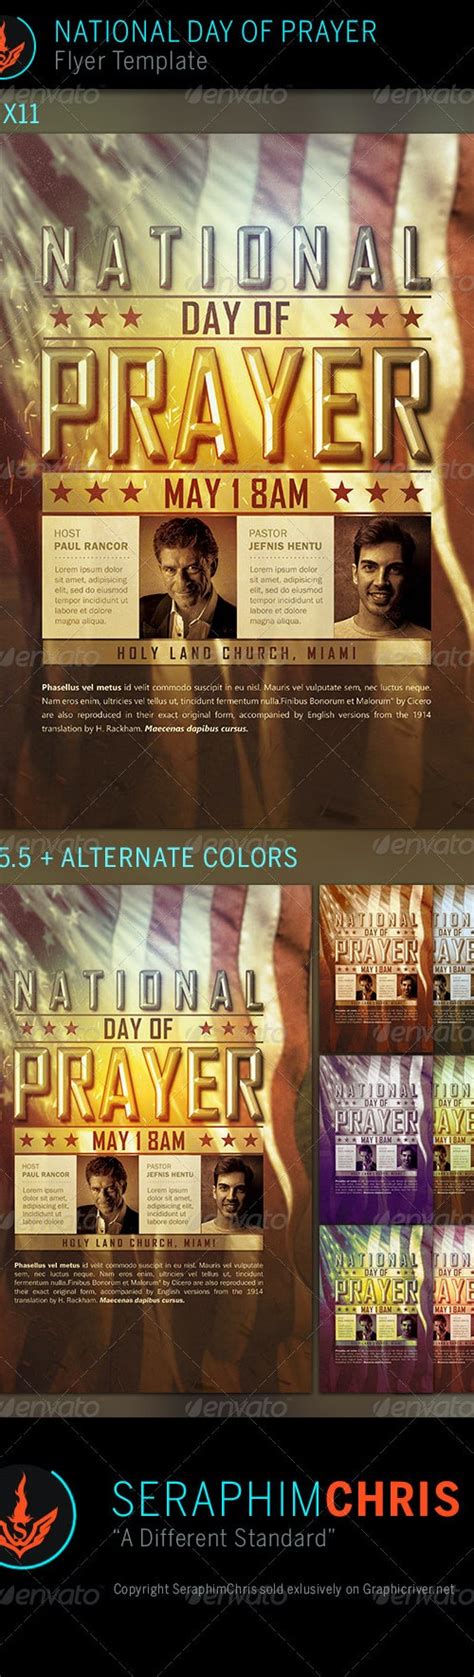 National Day Of Prayer Church Flyer Template By Seraphimchris